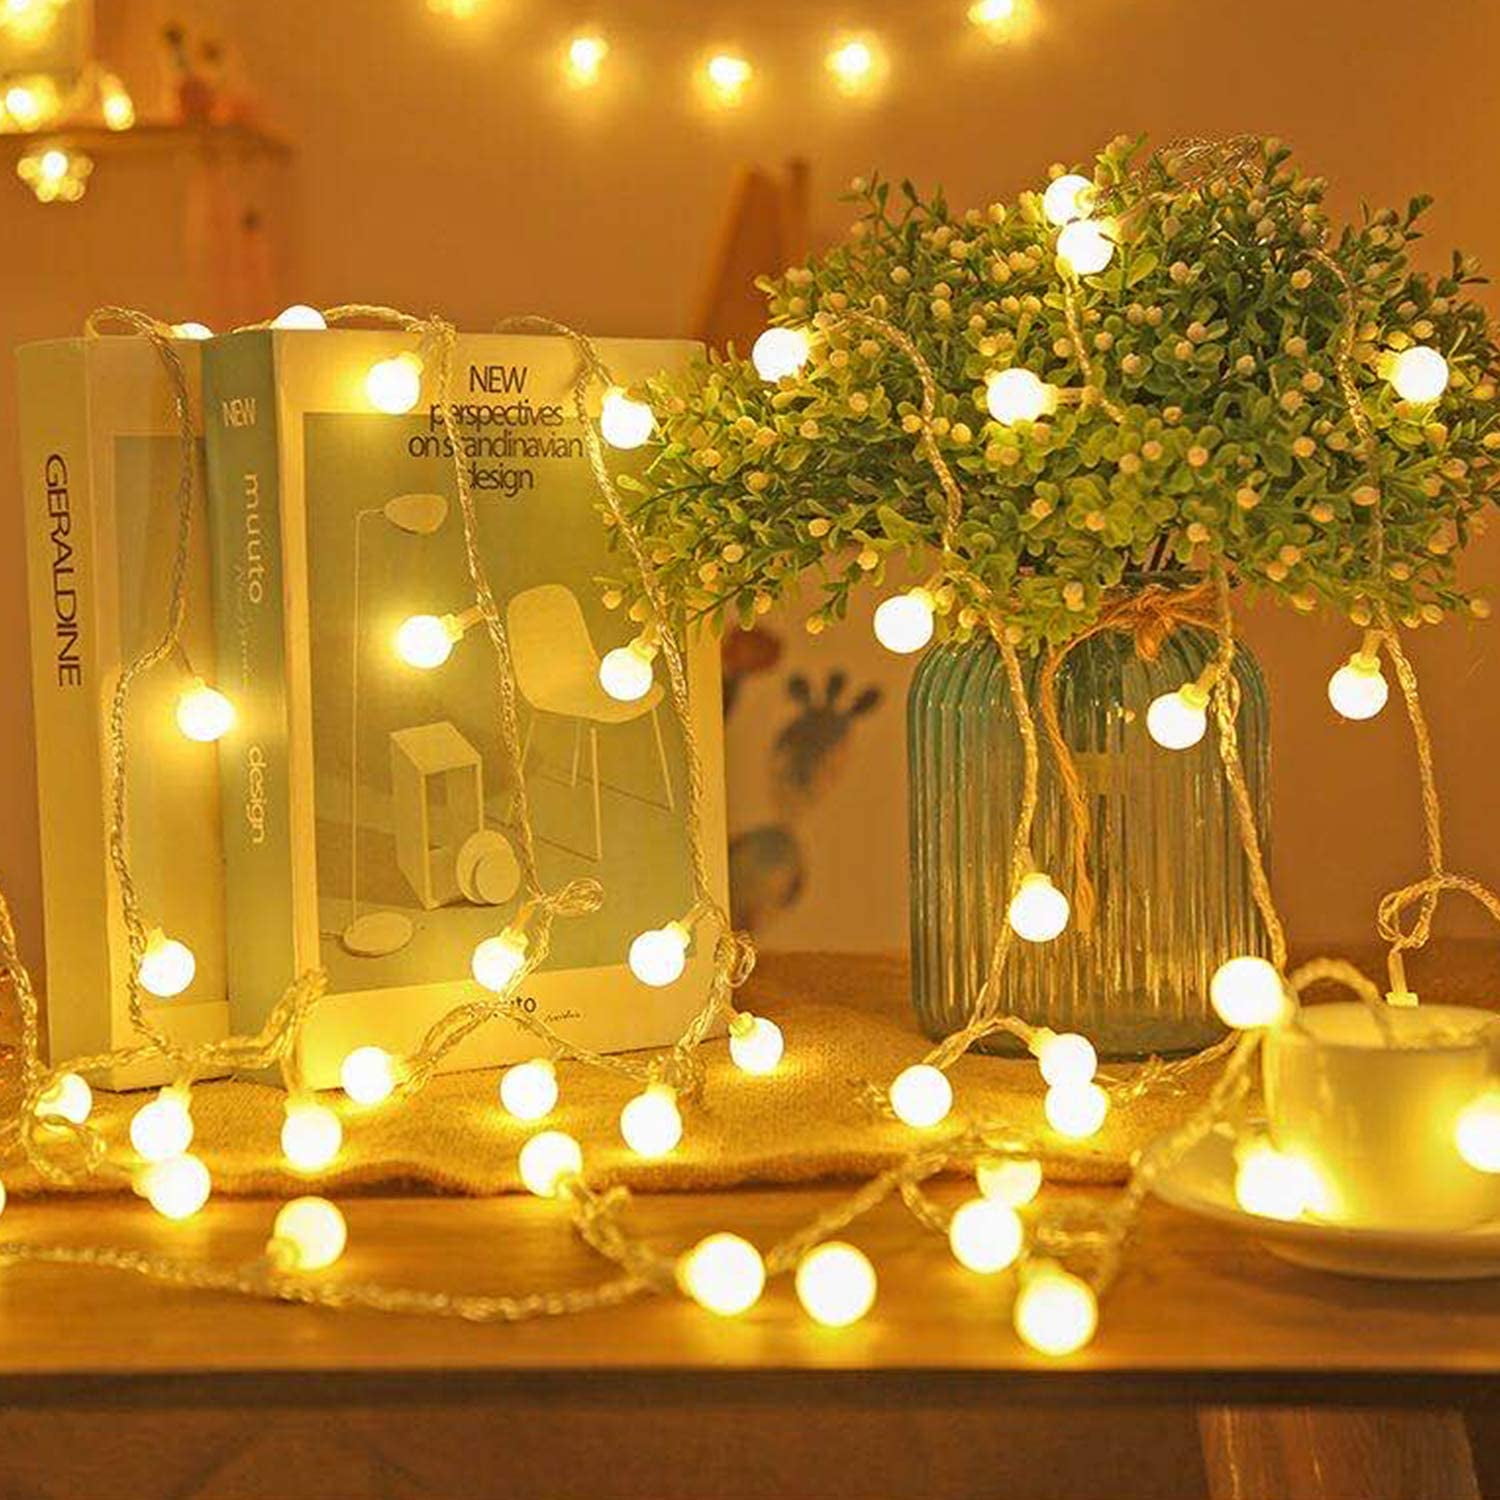 NEW 10M String Lights 100 LED Christmas Tree Fairy Party  Lamp Xmas Waterproof 